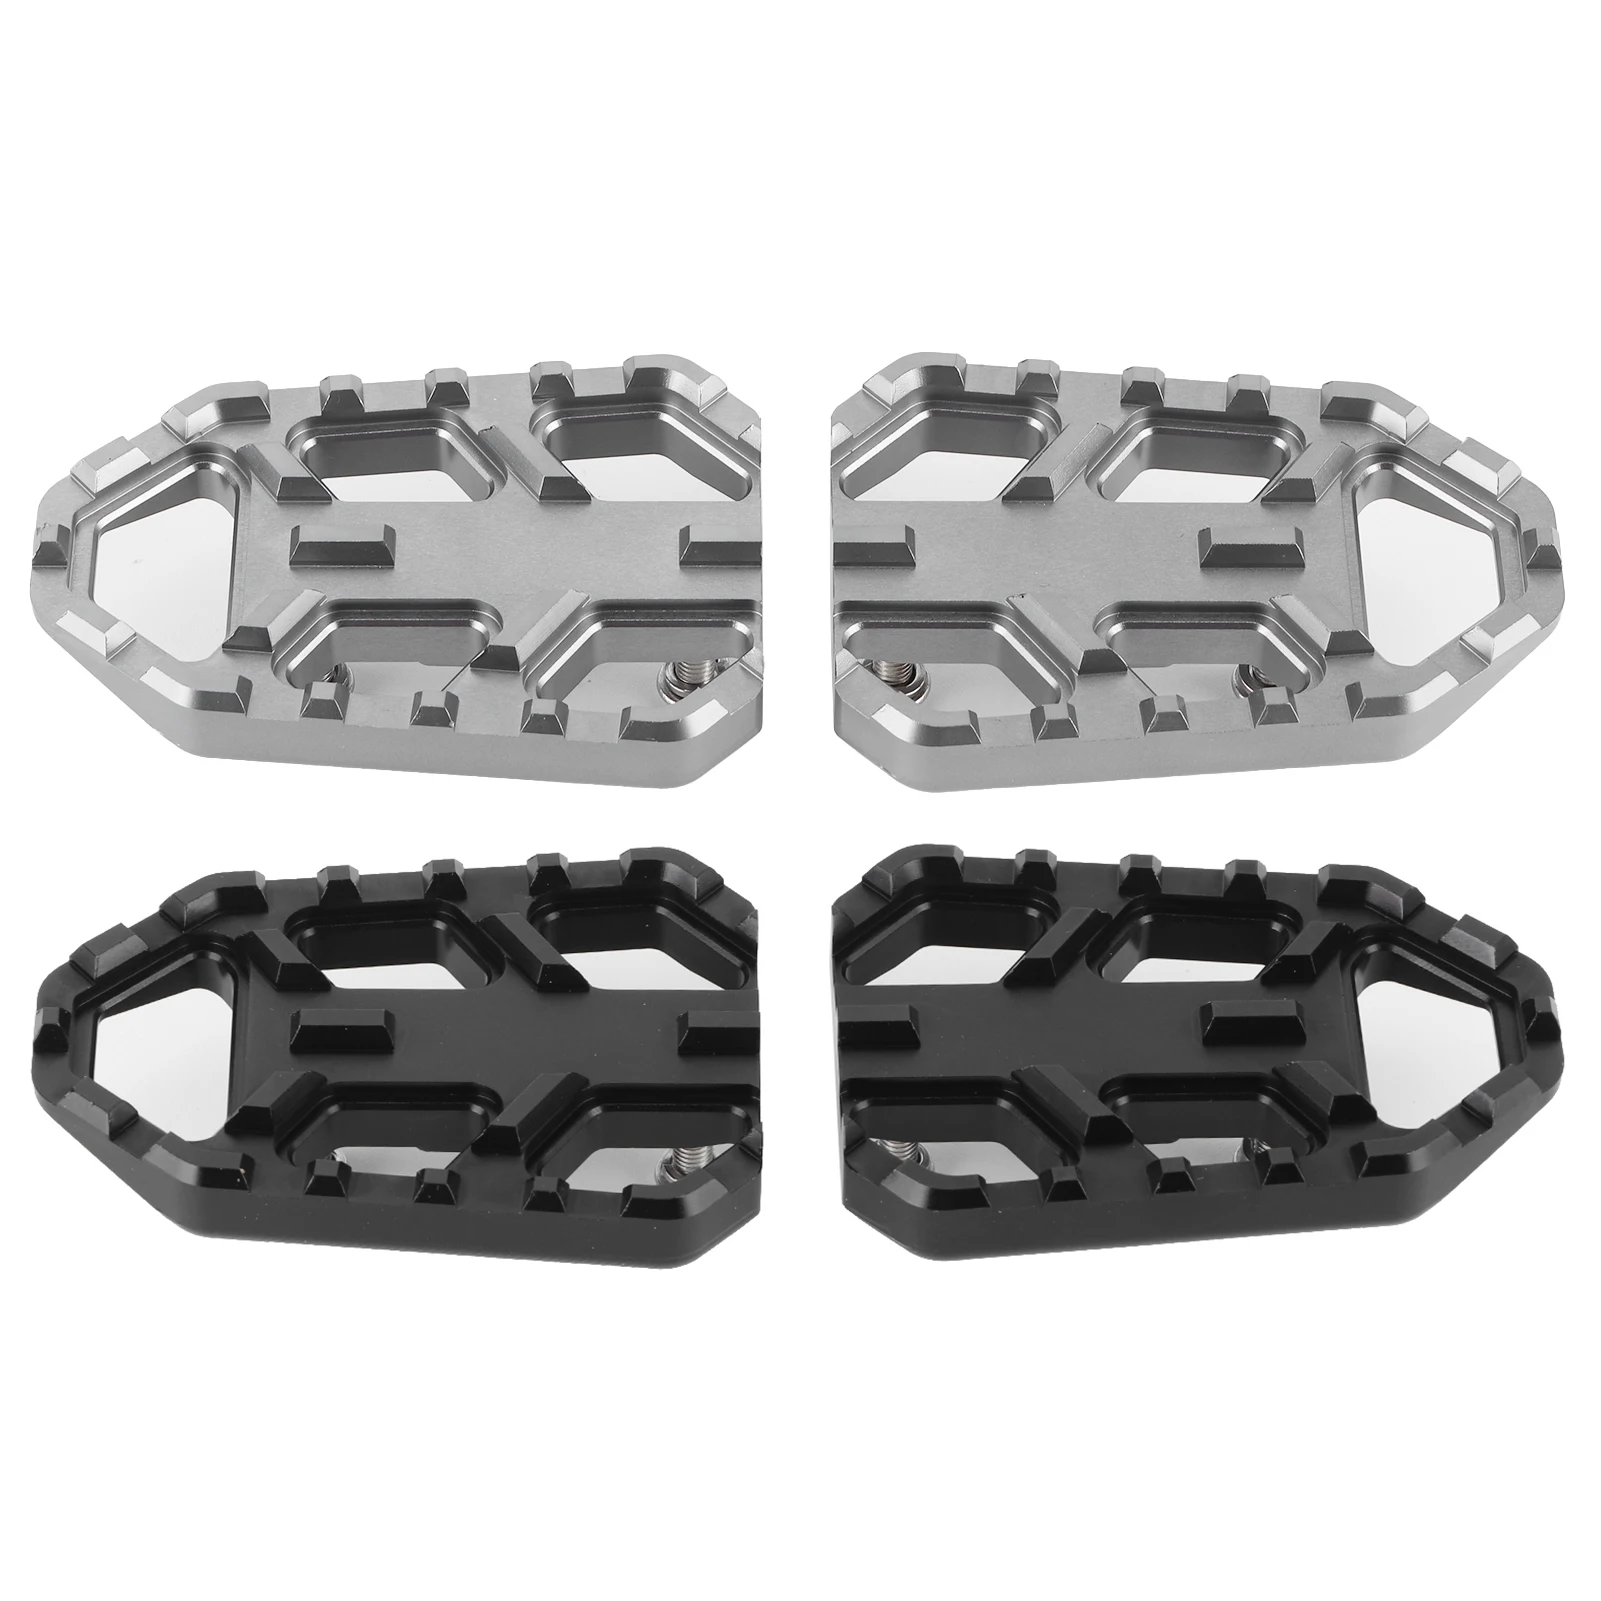 Cycling Foot Rest Foot Pegs Motorcycle Wide Footrest CNC Aluminum Alloy ... - $32.44